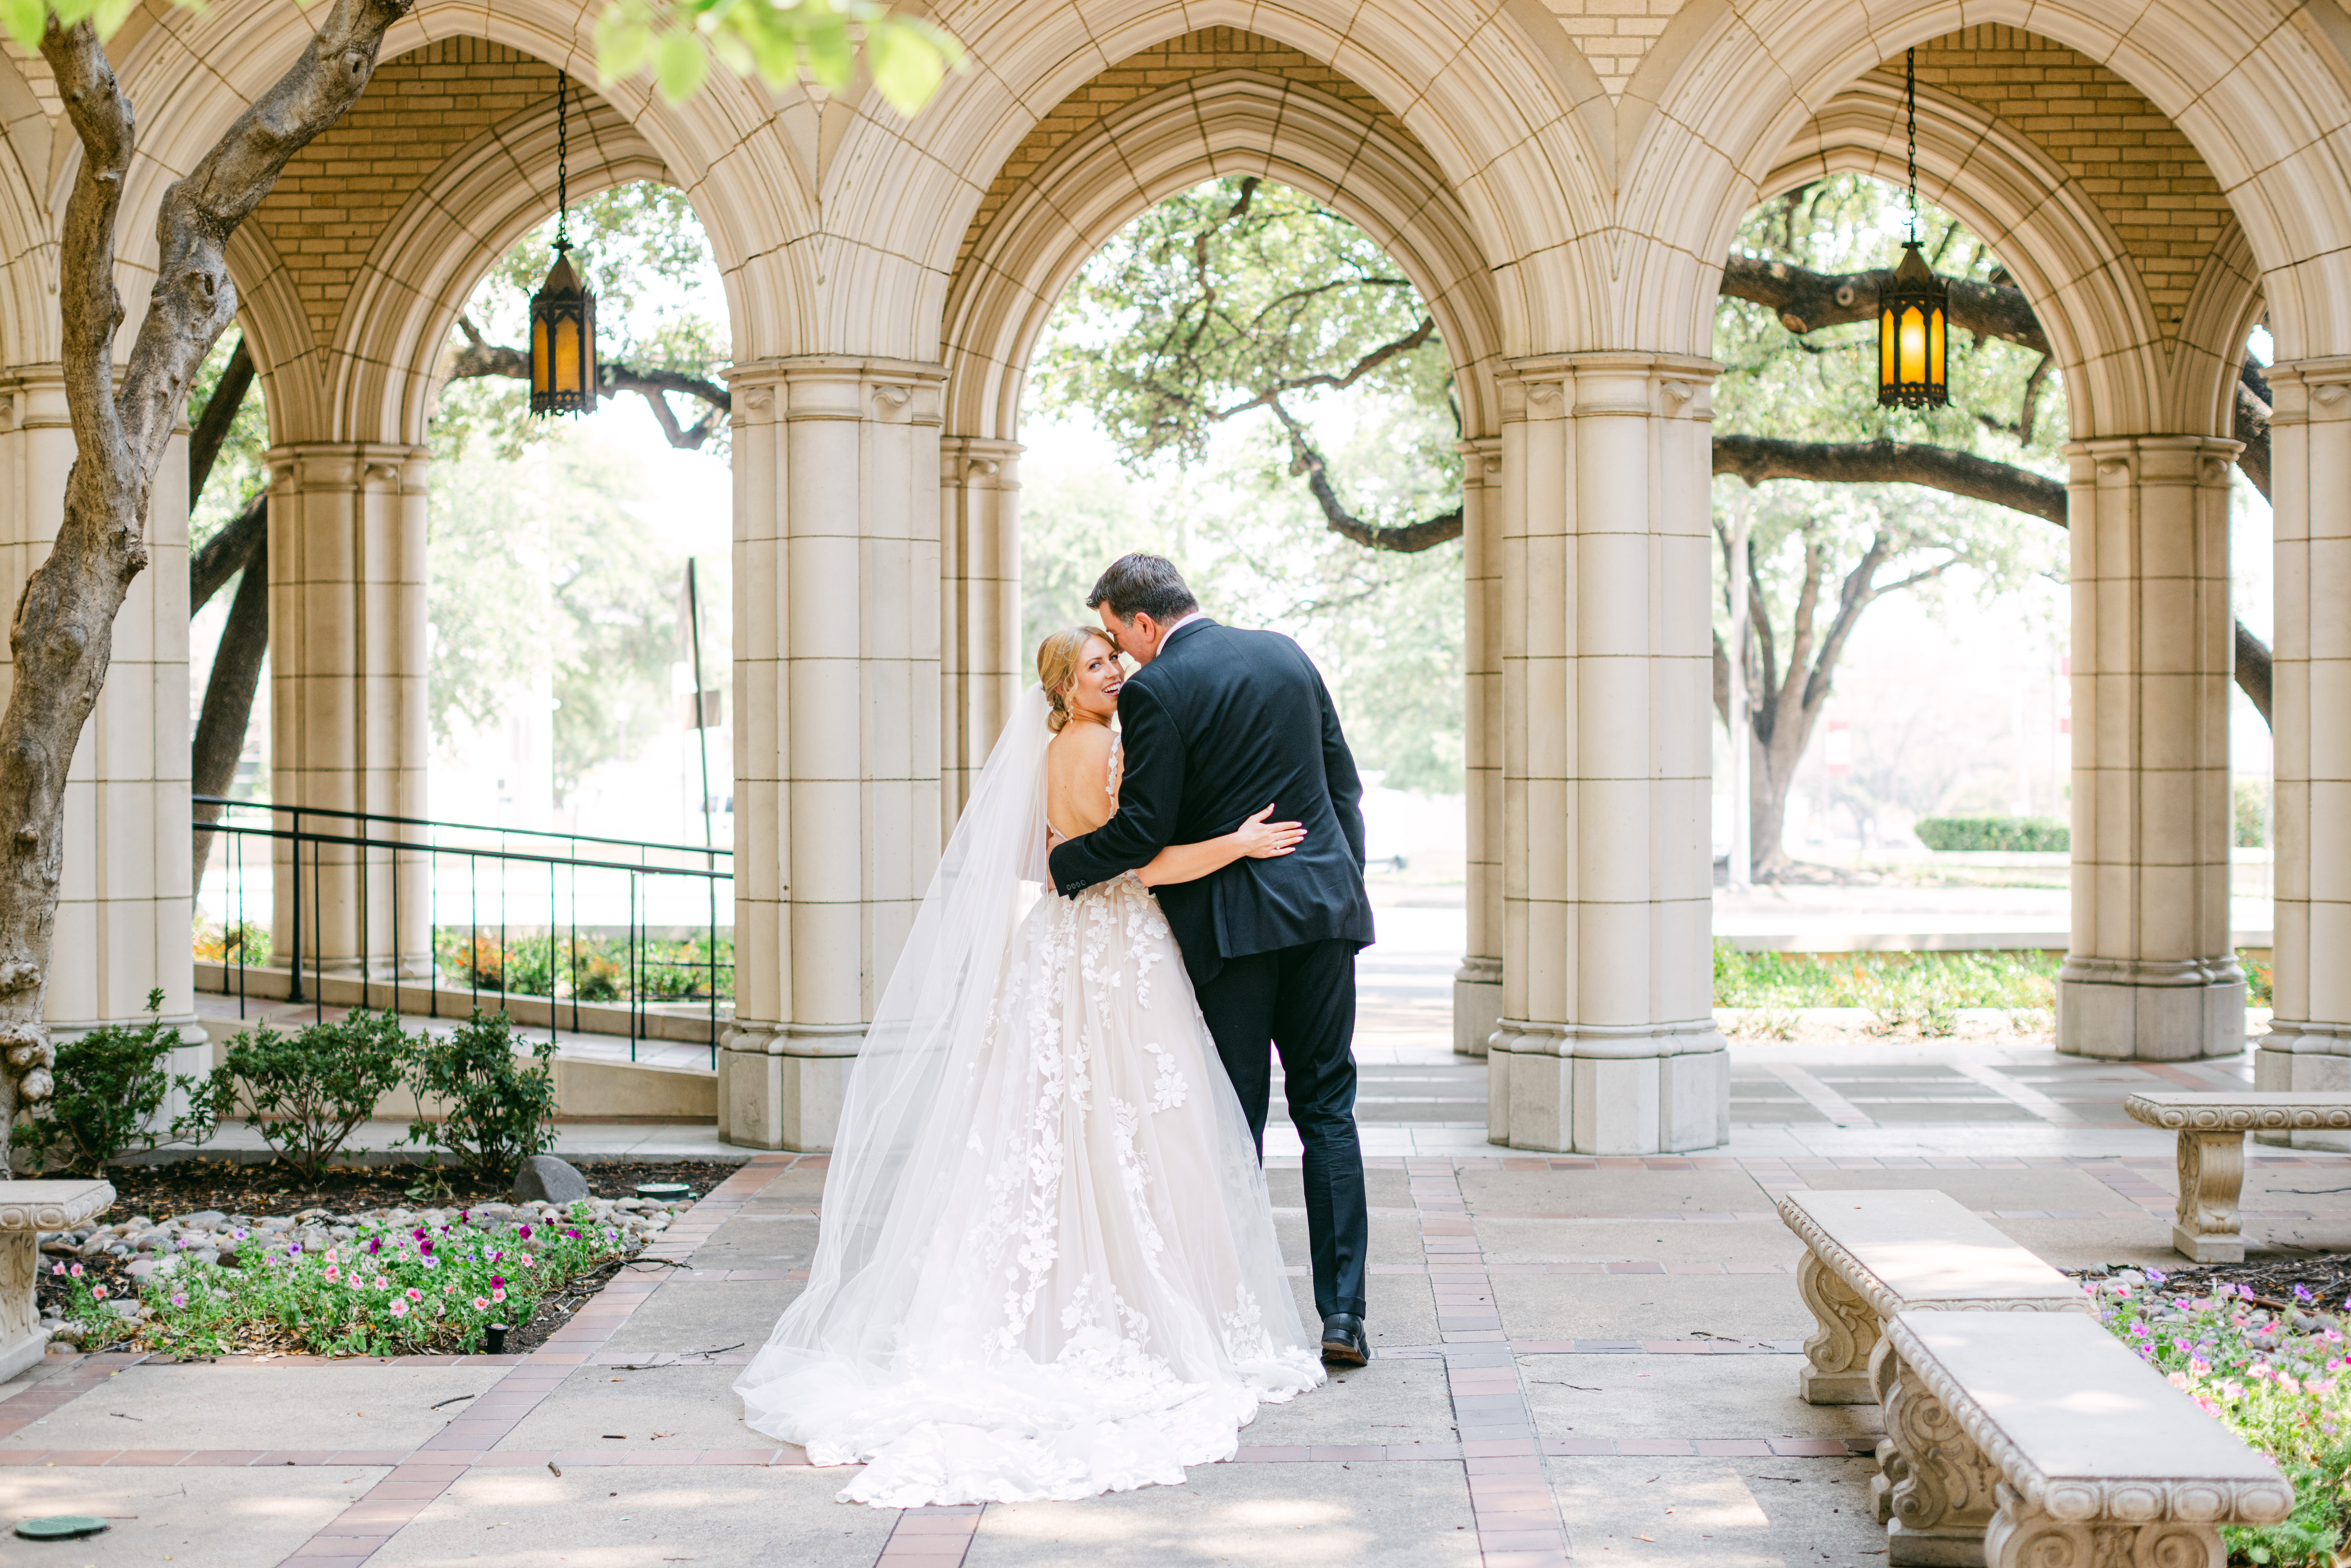 A bride and groom embrace each other and face away, as the bride smiles back at the camera during their Fort Worth, Texas wedding at the historic Texas & Pacific Railway Terminal. Photo by Kate Noelle Photography.